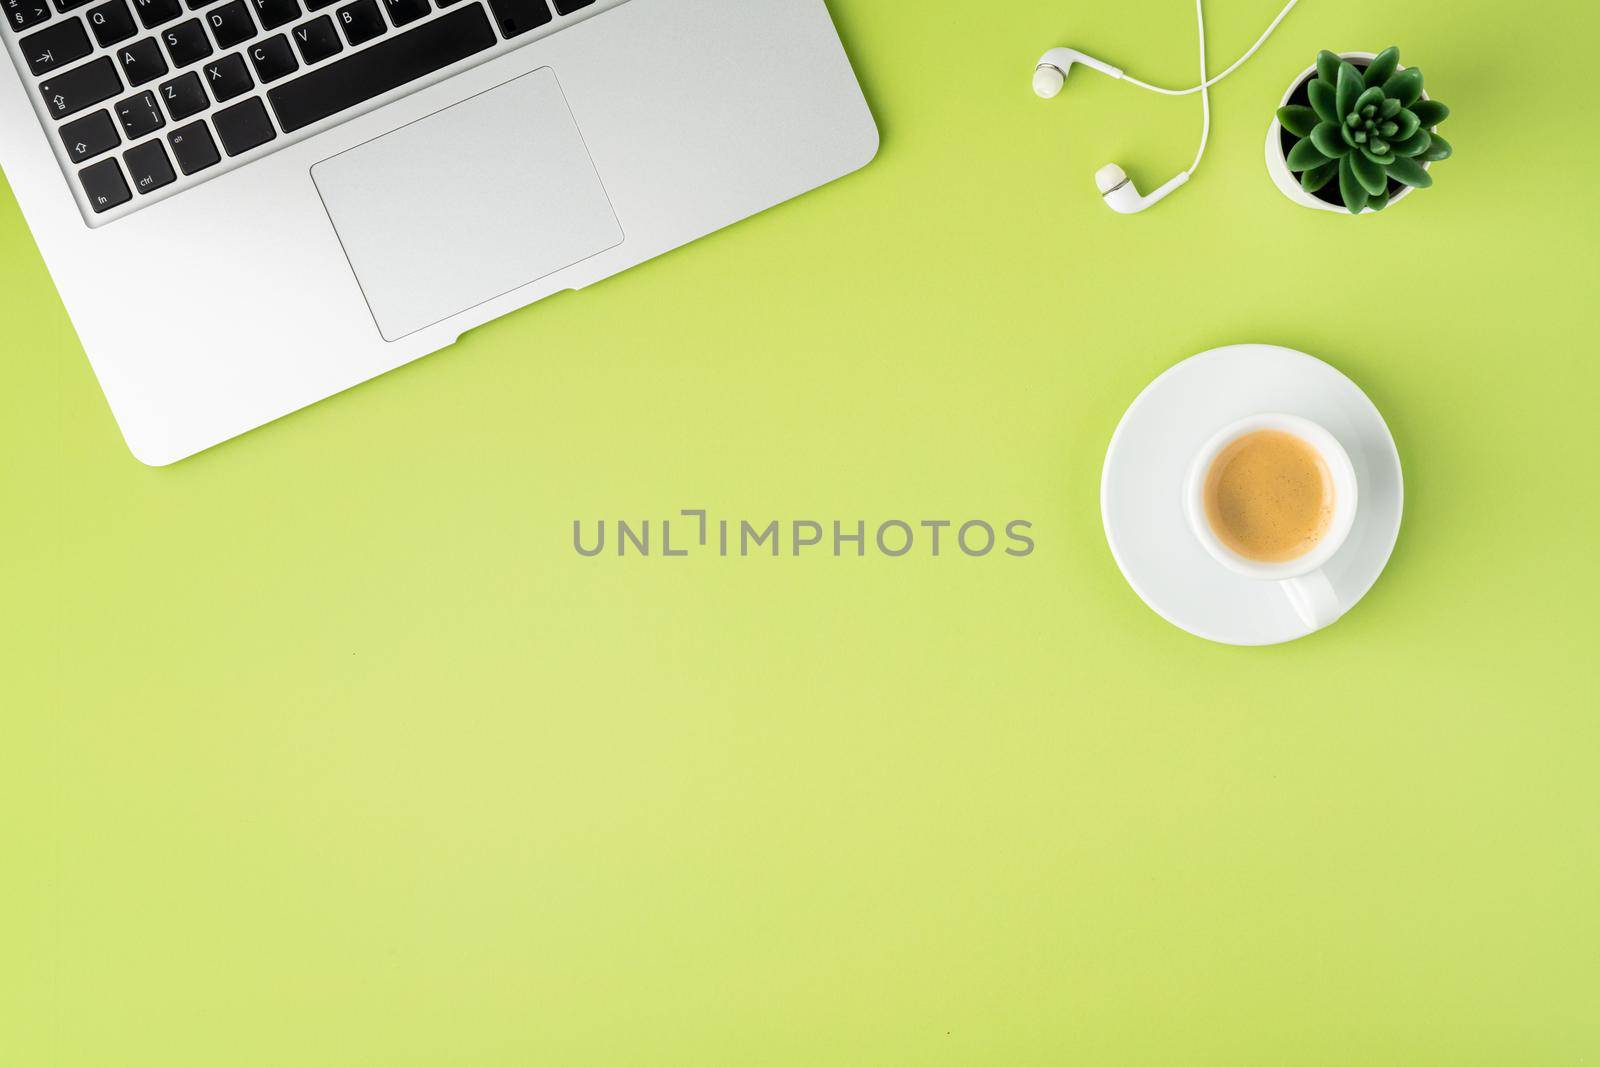 Horizontal of metallic laptop keyboard, white earphones and coffee cup on light green background by NataBene